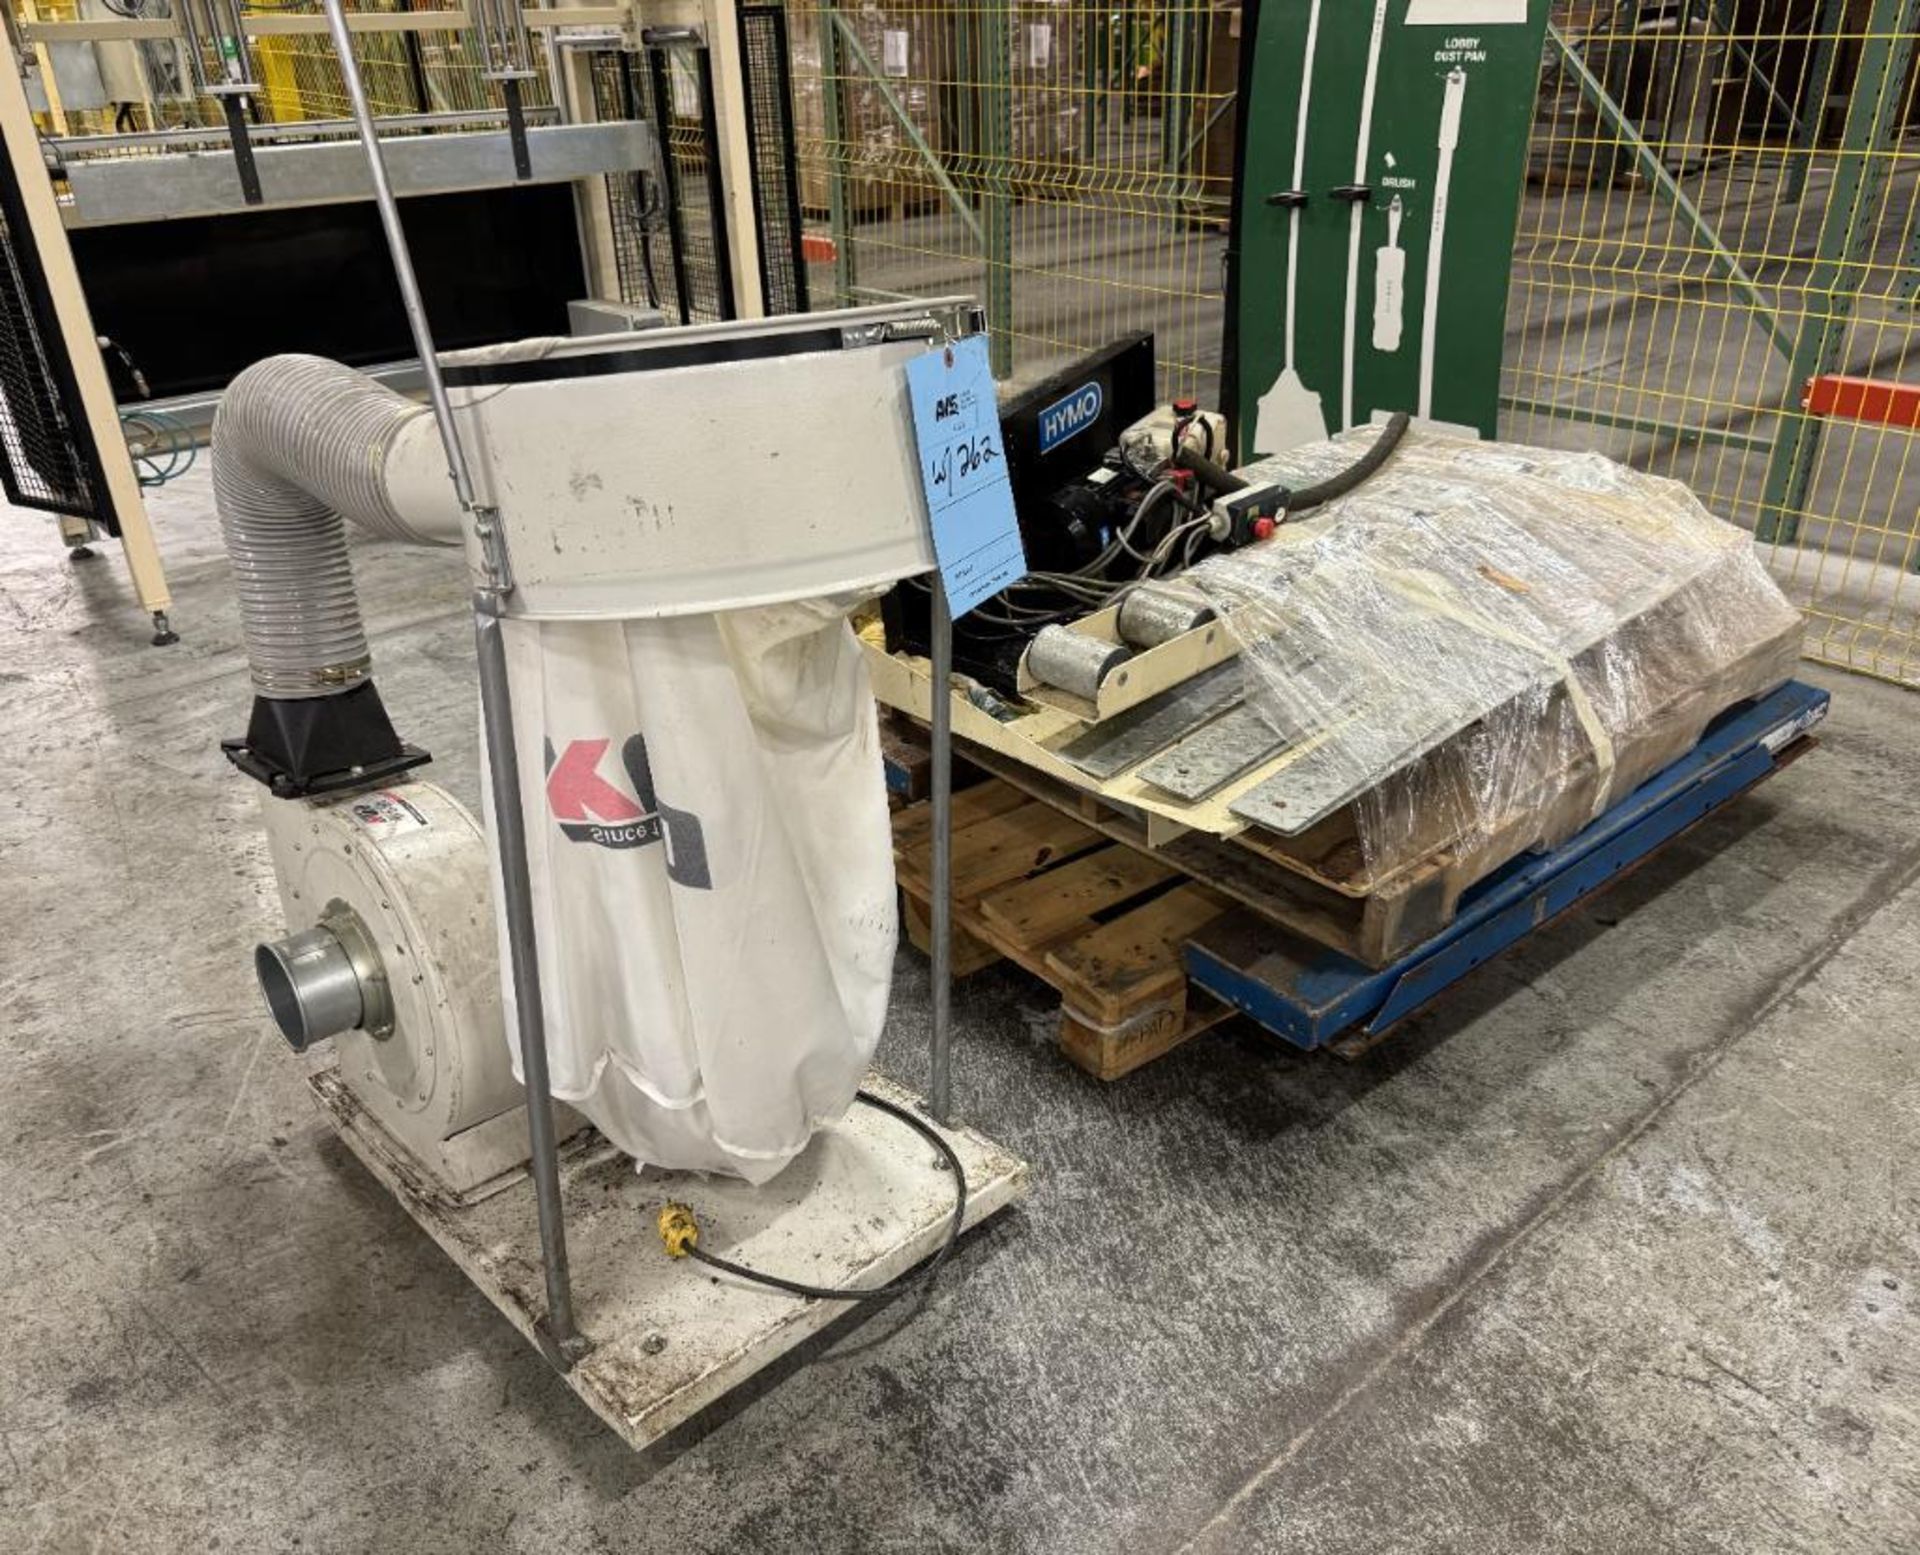 Lot Consisting Of: Hymo lift table with power pack, (1) Kufo UFO-101 dust collector.